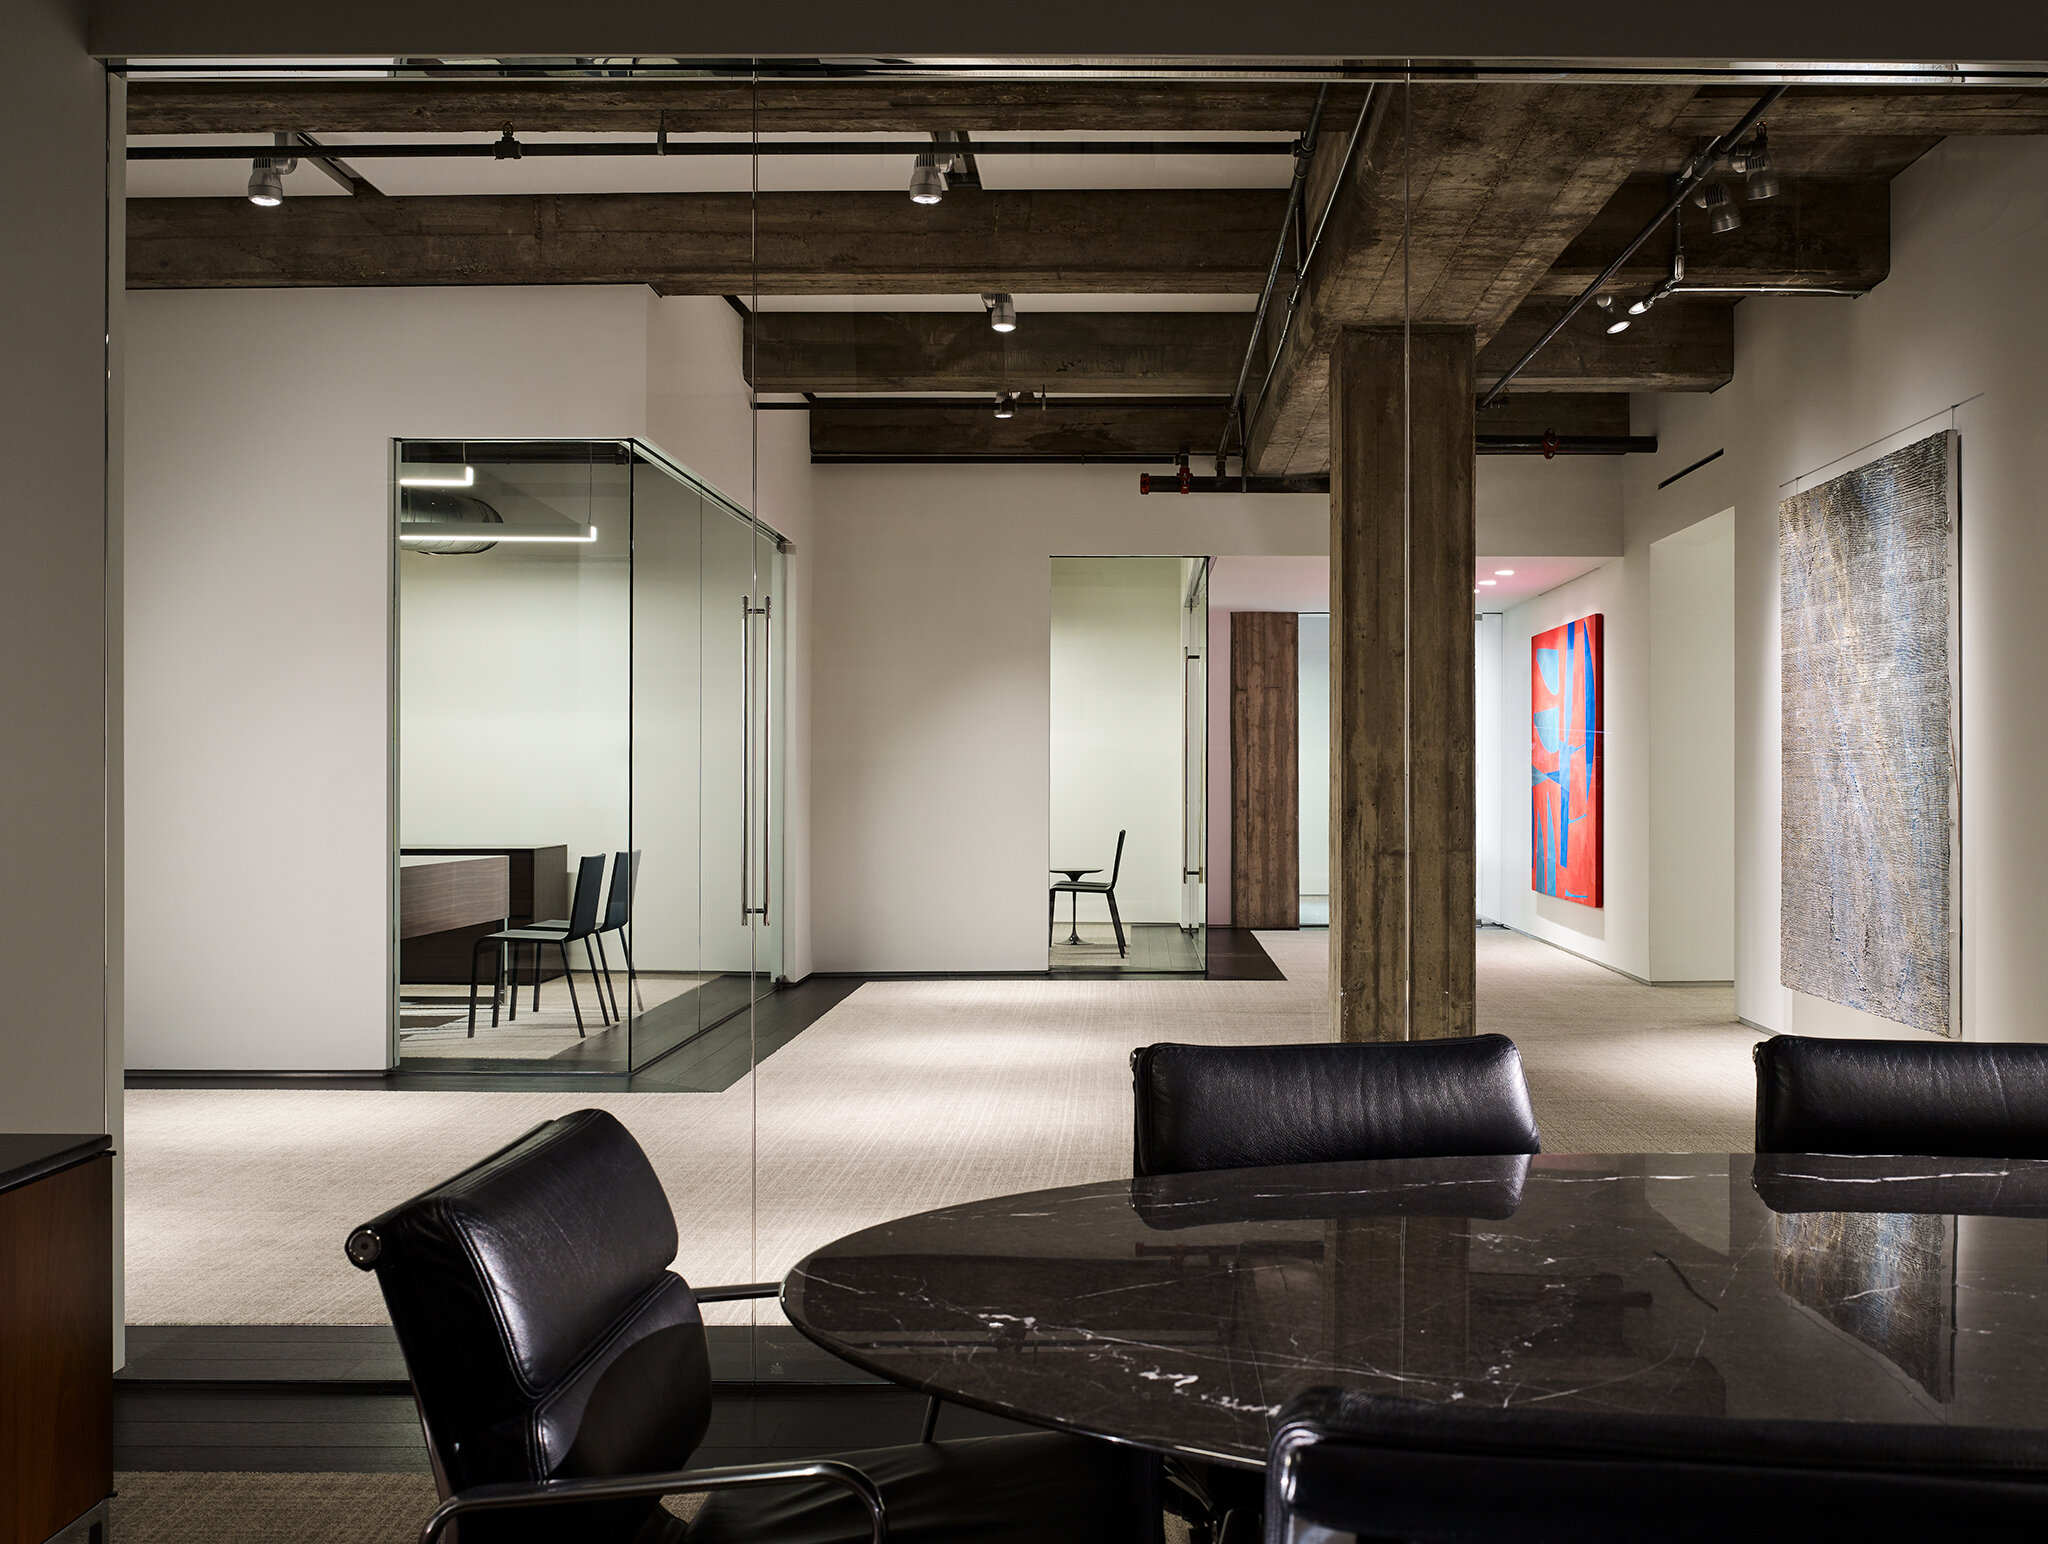  AWARDS  Office Transformation Honoree, Interior Design’s Best of Design, 2020    Eagle Family Executive Offices  DLR Group |  Staffelbach   Dallas, Texas     Return to projects  